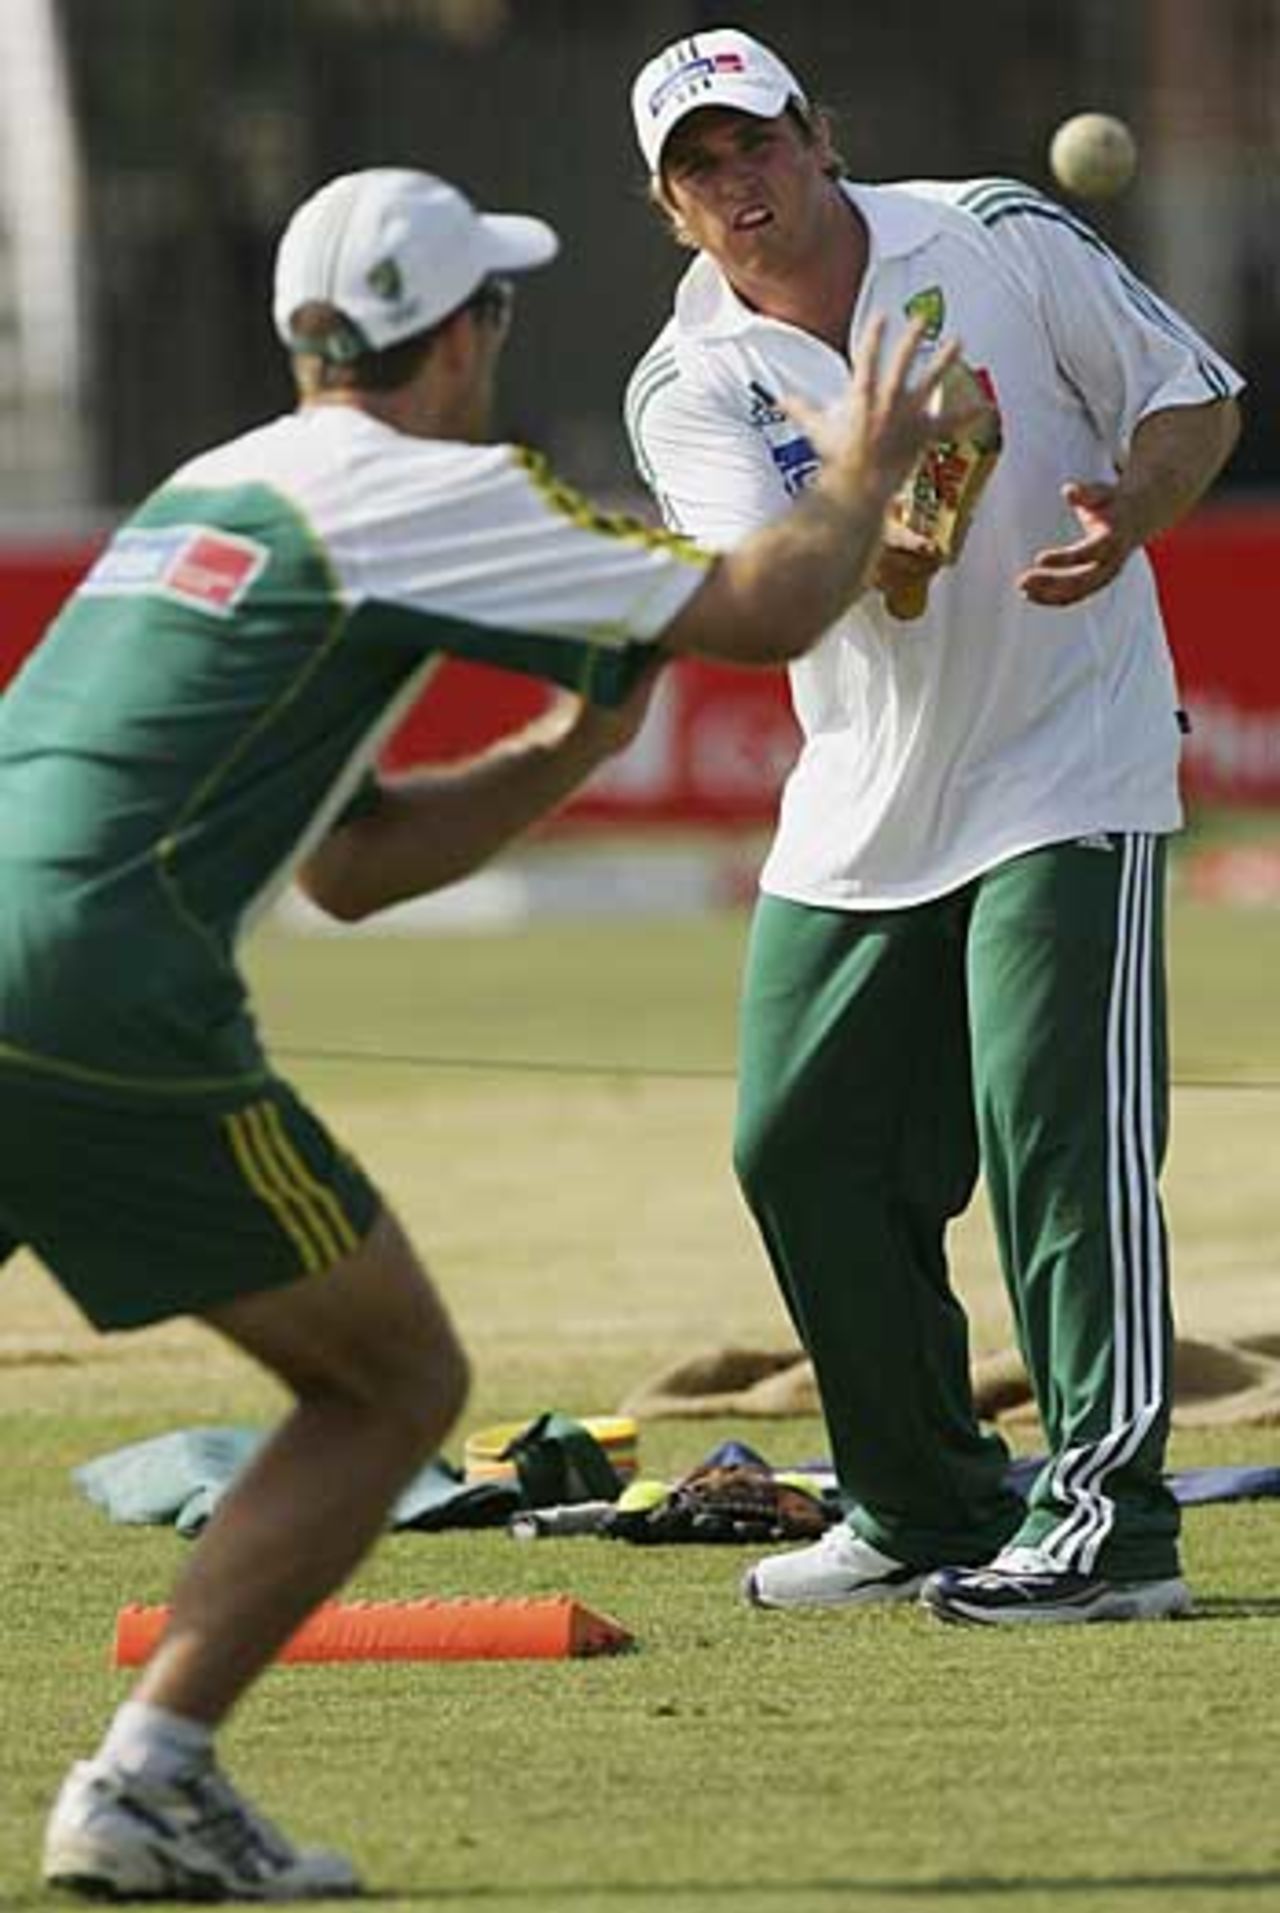 Mark Cosgrove gives Simon Katich catching practice, Chittagong, April 22, 2006